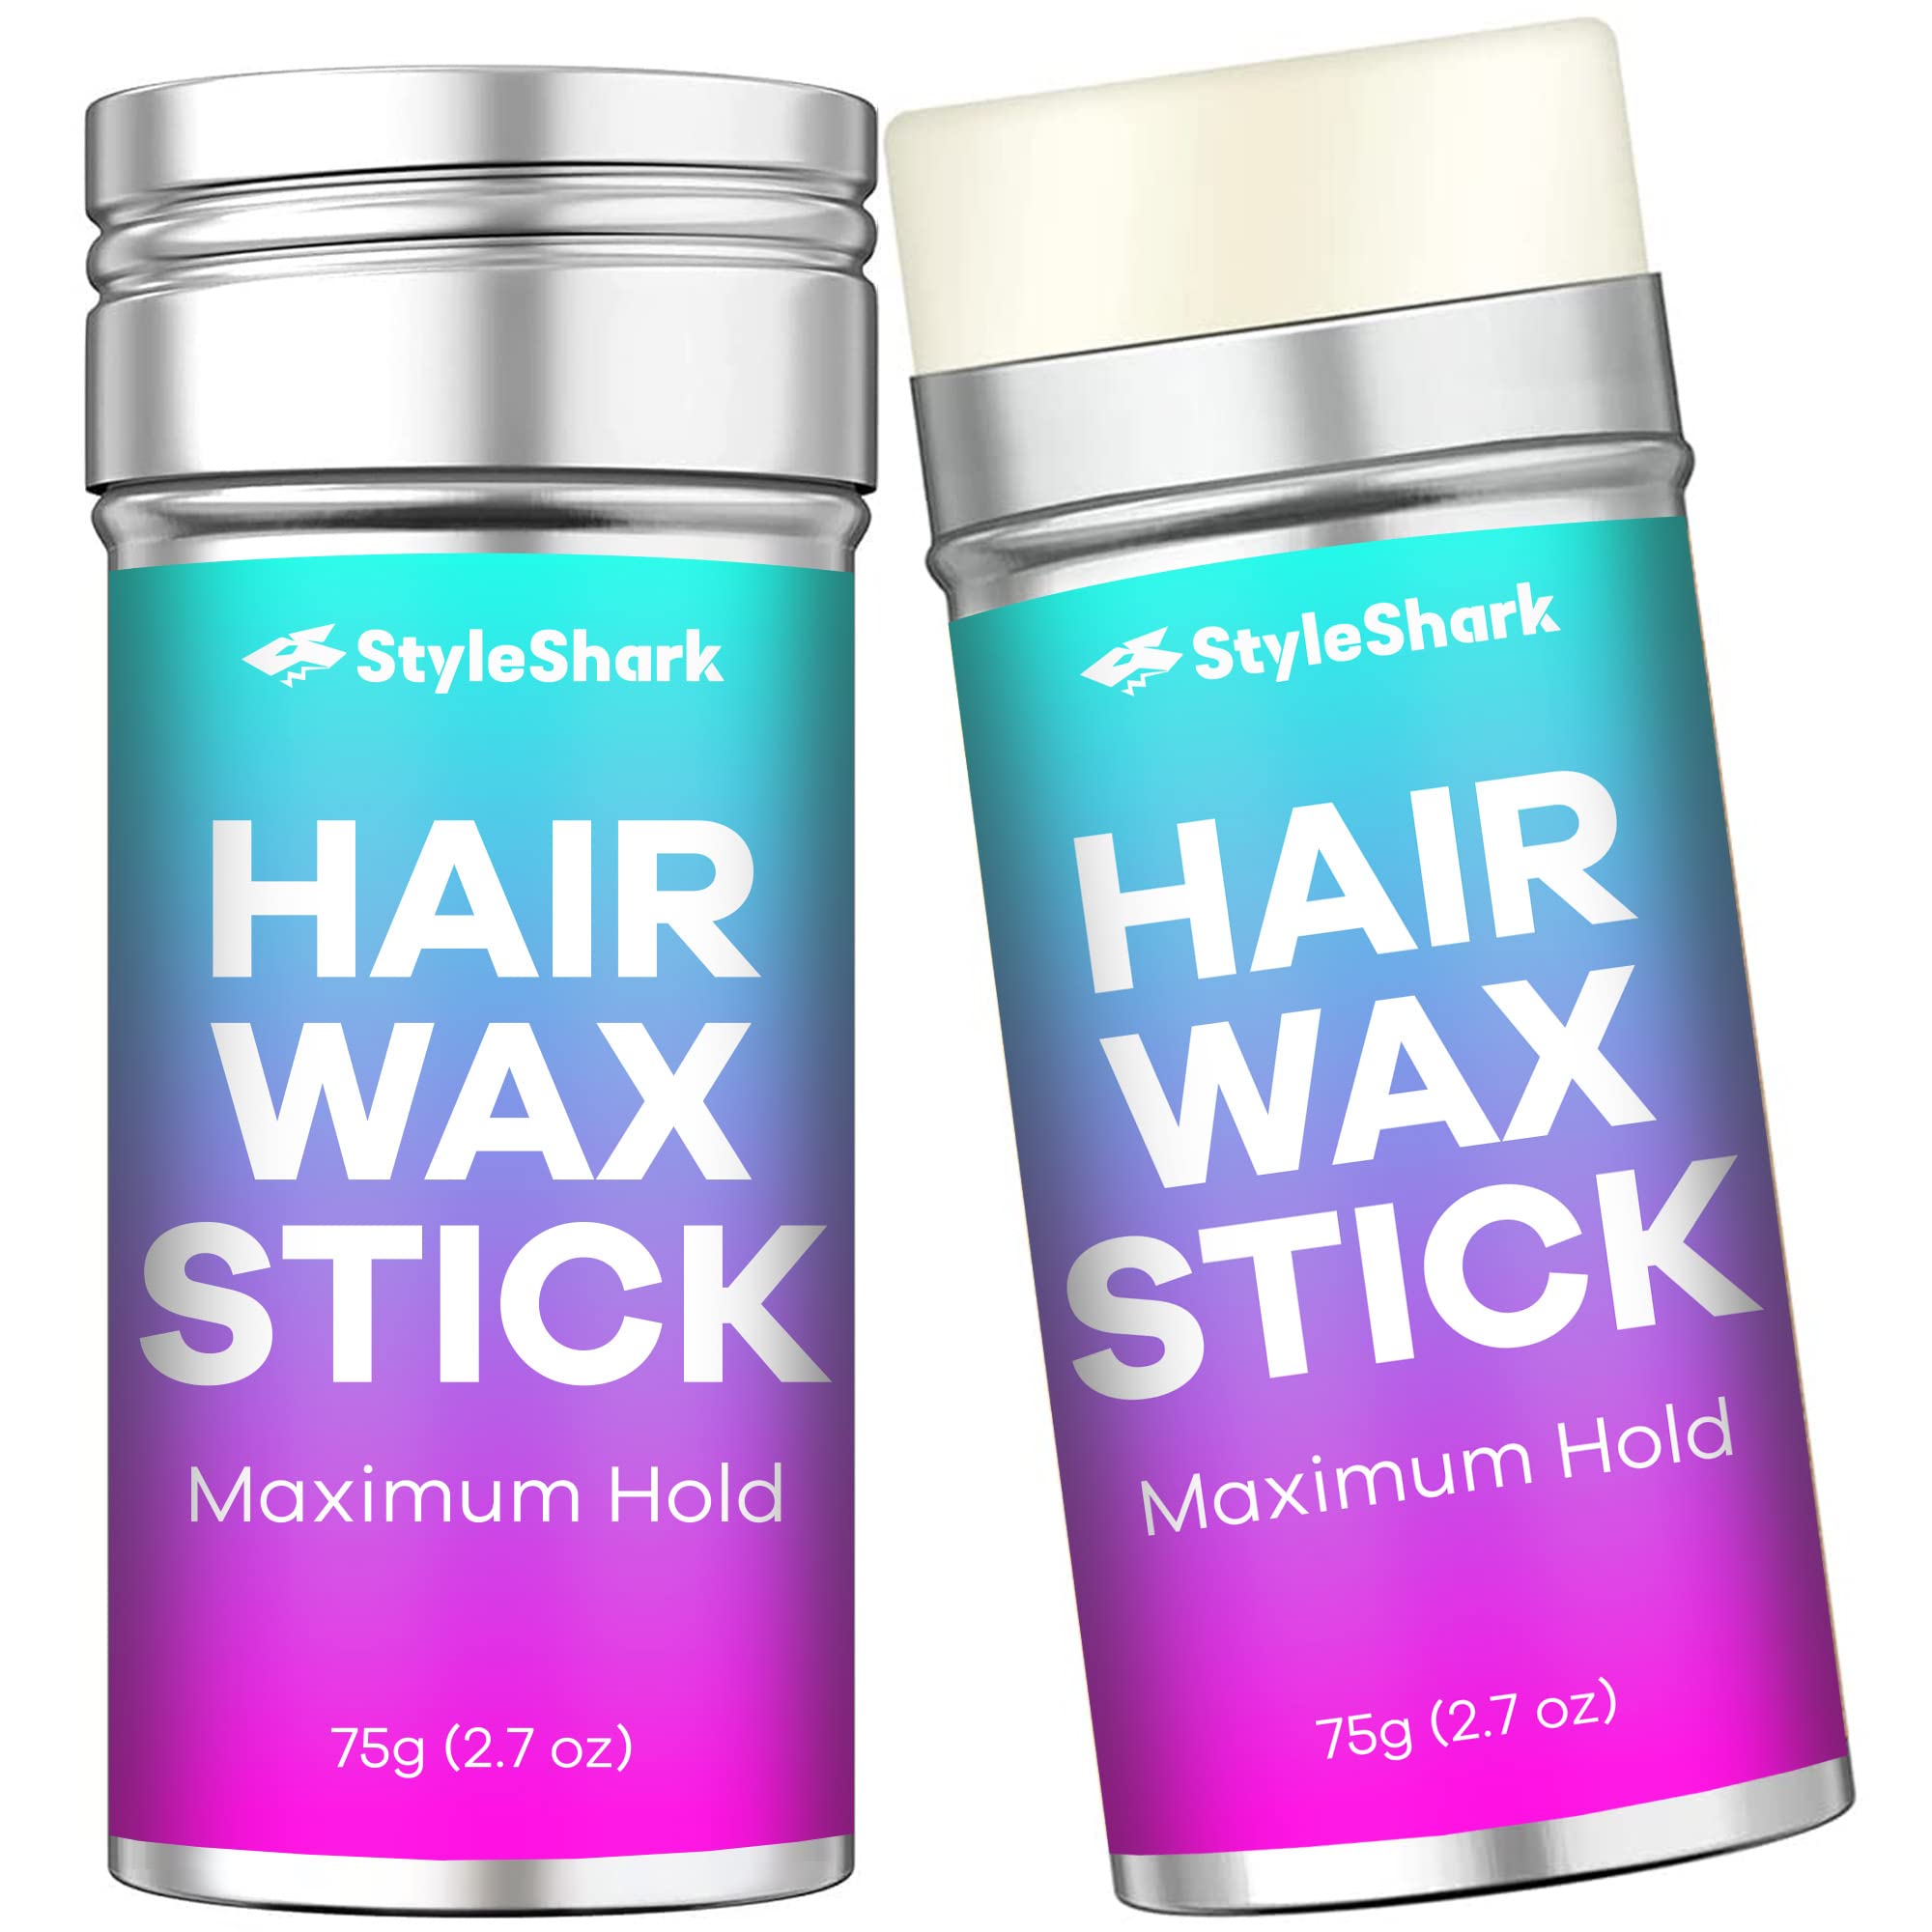 StyleShark Hair Wax Stick 2.7 oz, Wax Stick for Hair, Slick Stick for Hair Edge Control, Hair Stick Wax for Flyaways, Frizz Hair, Wigs, Non-Greasy H